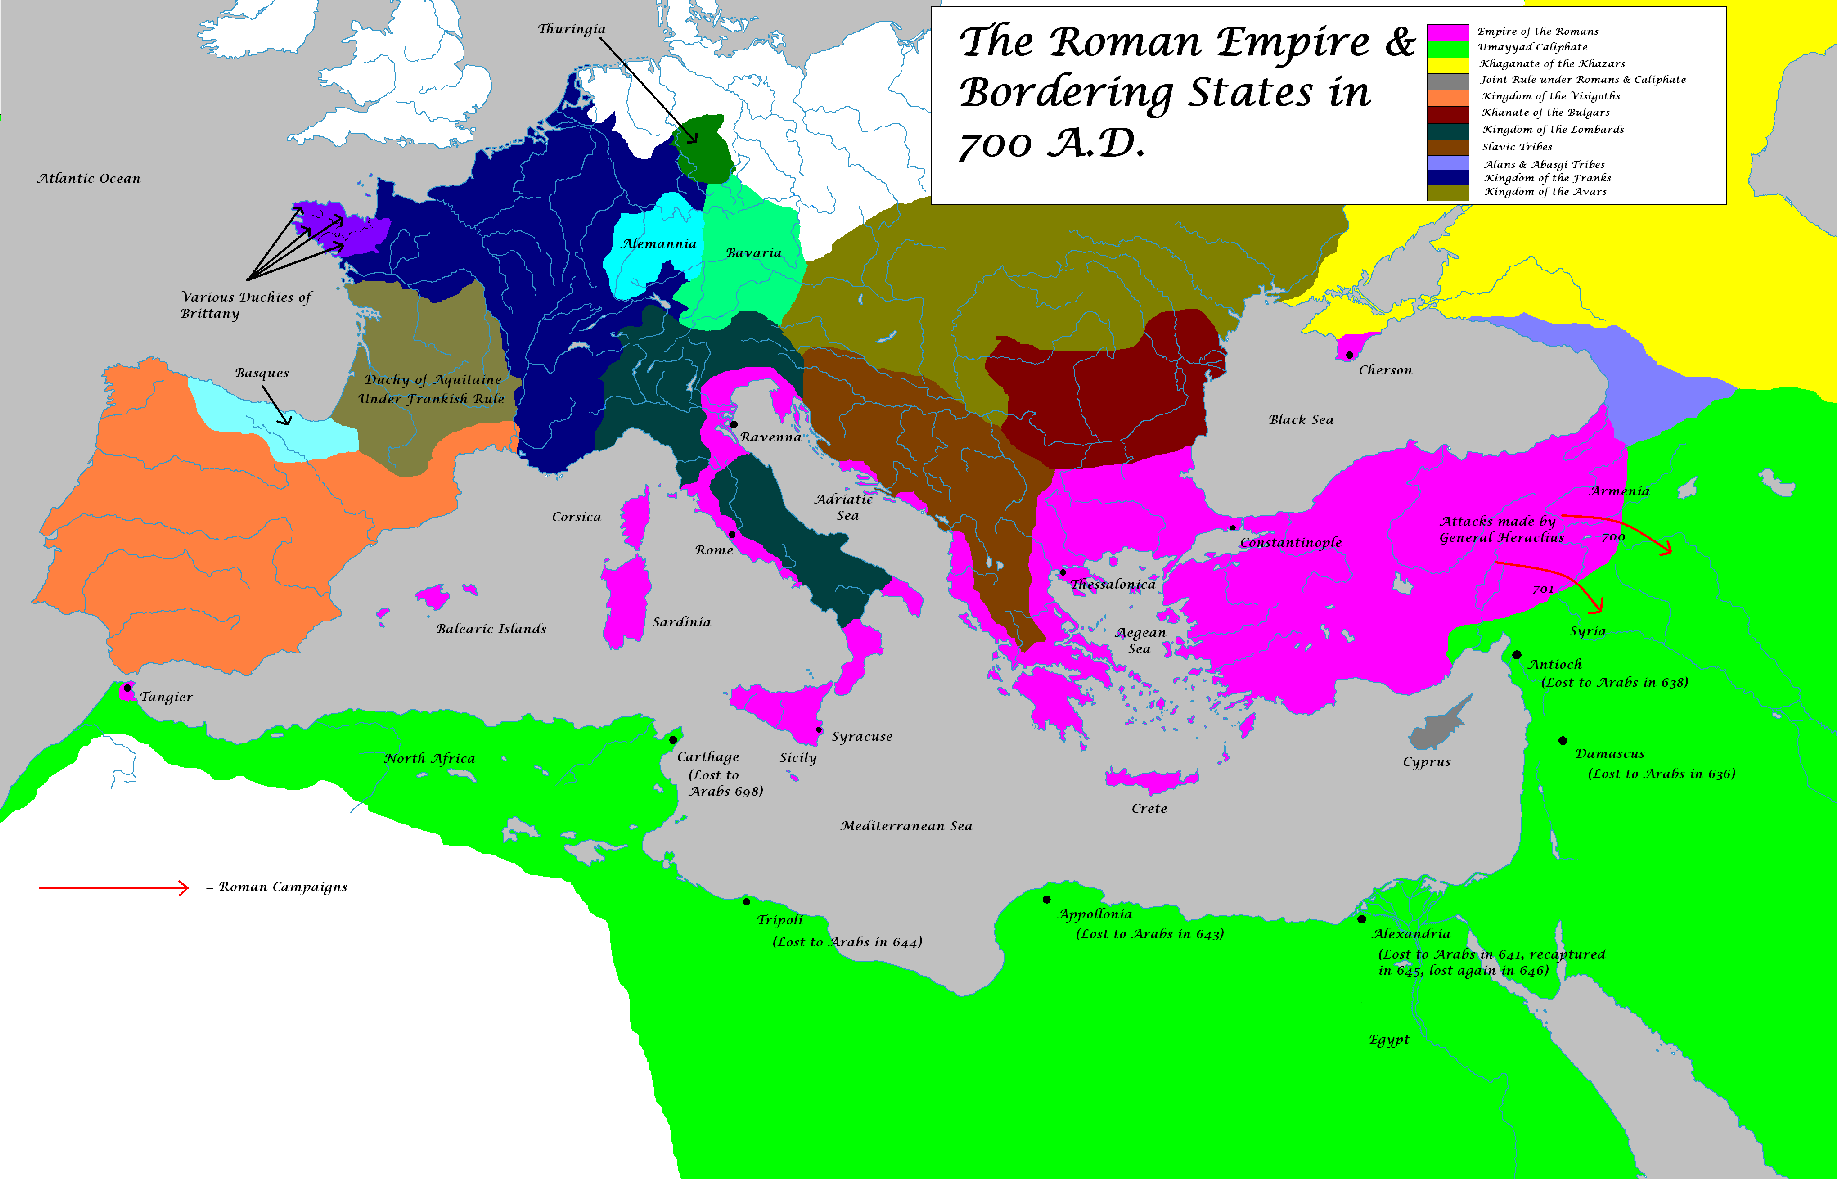 Roman Empire 700 AD revised.png